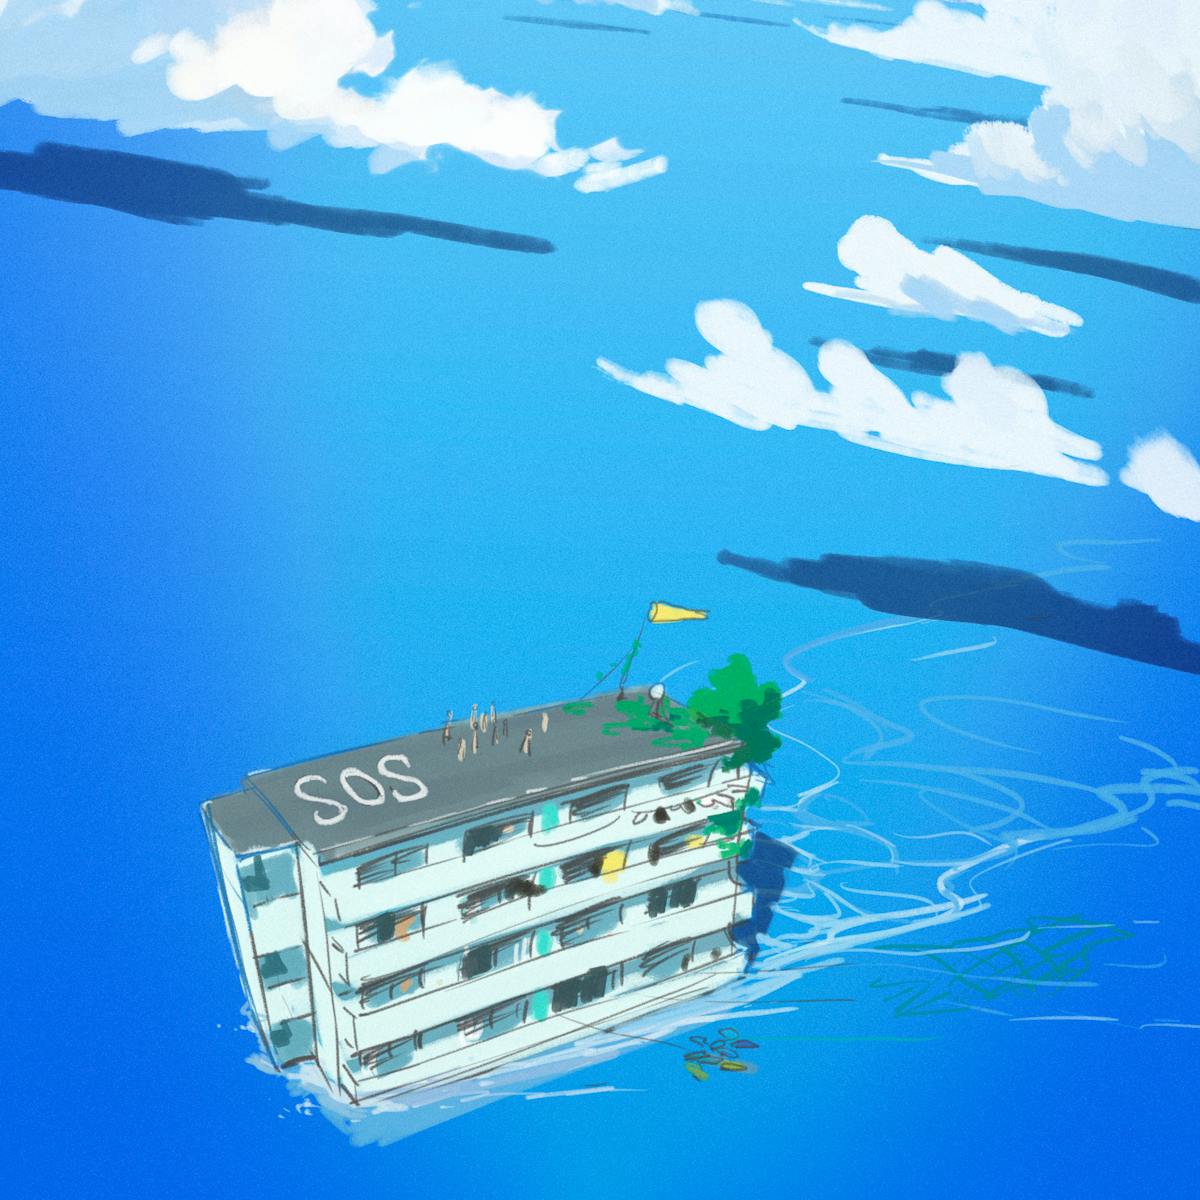 The apartment complex floats out to sea.  